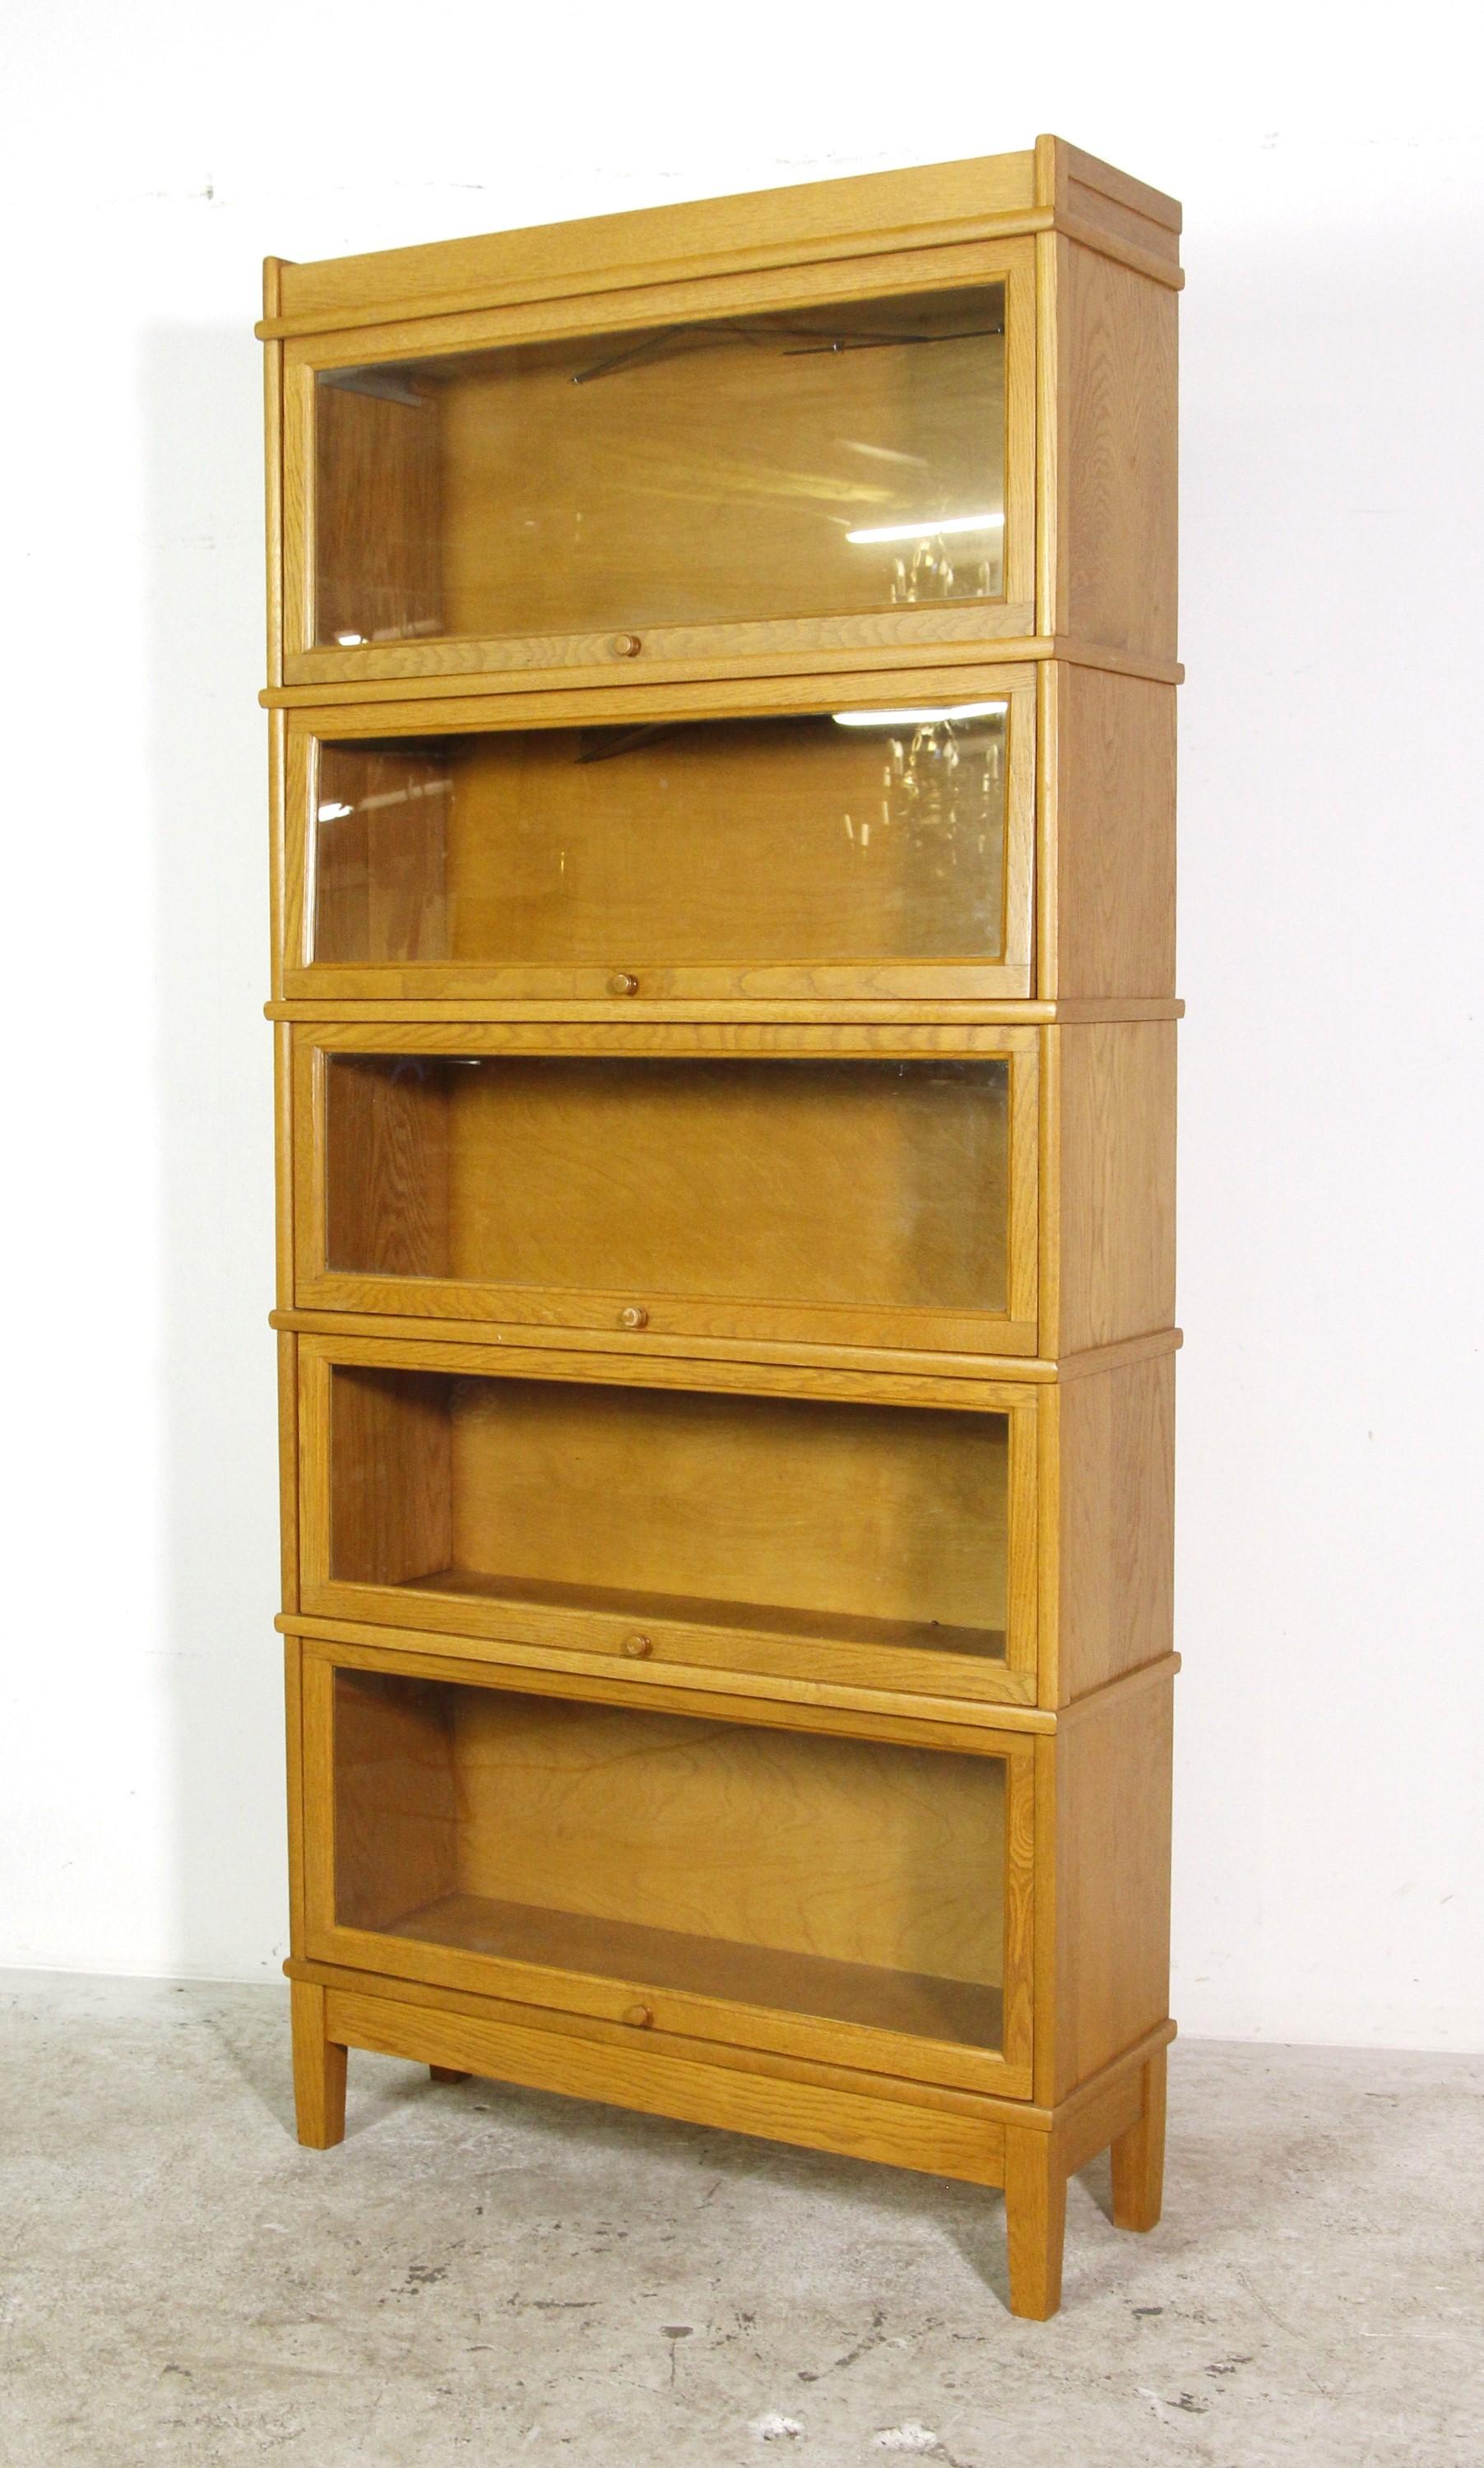 Solid oak 5 section, stacking barrister bookcase with sliding glass fronts and wooden pulls. This antique bookcase has good working glass doors, and all the original glass is intact. Please note, this item is located in one of our NYC locations.